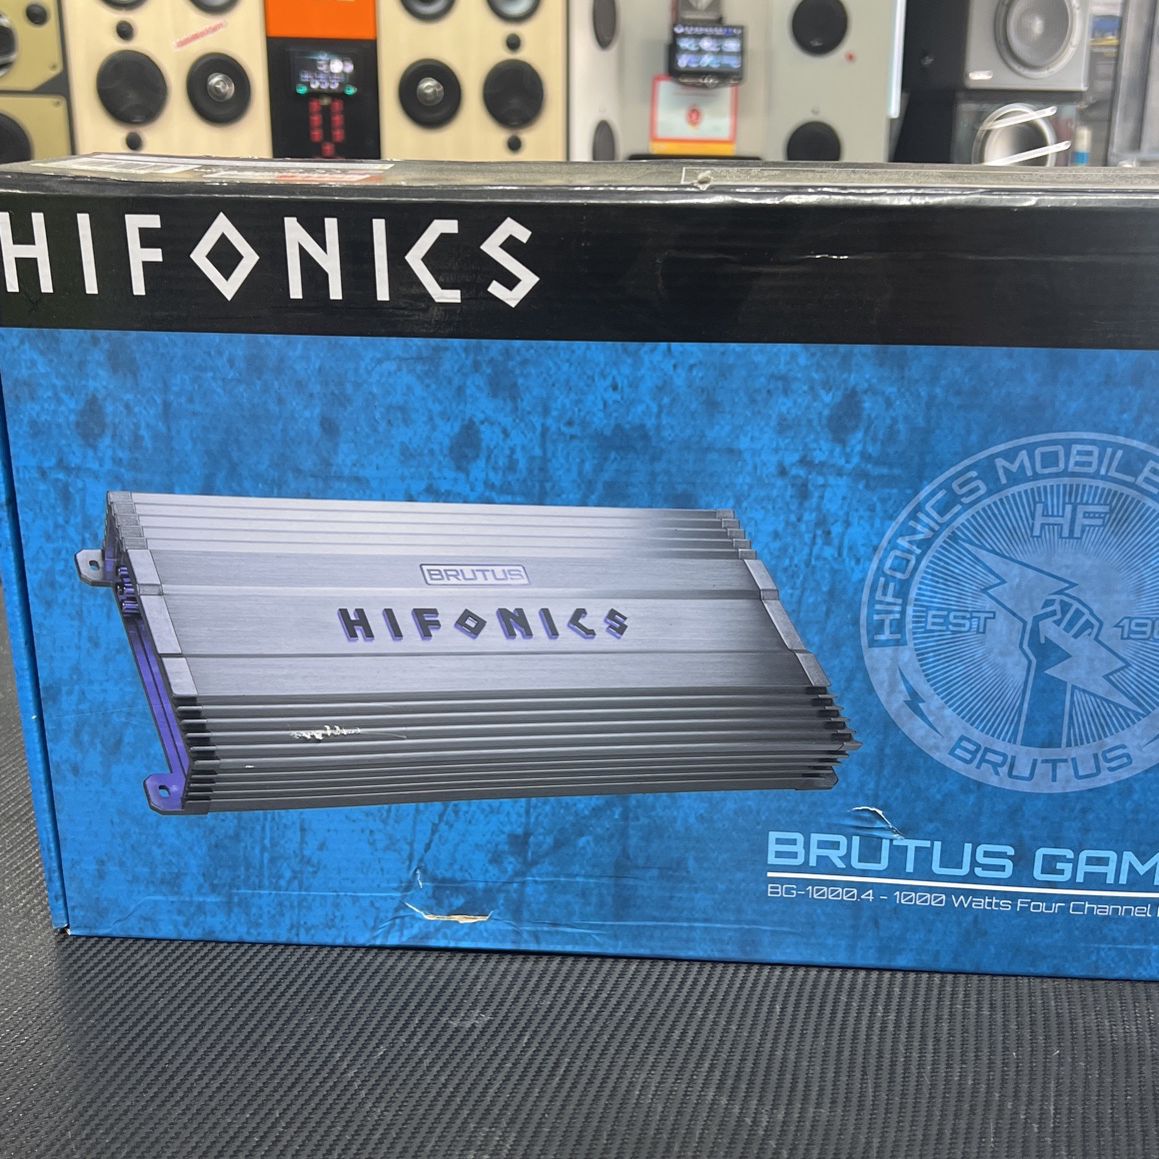 Hifonics four Channel Amplifier Car Amplifier On Sale Only One Oh